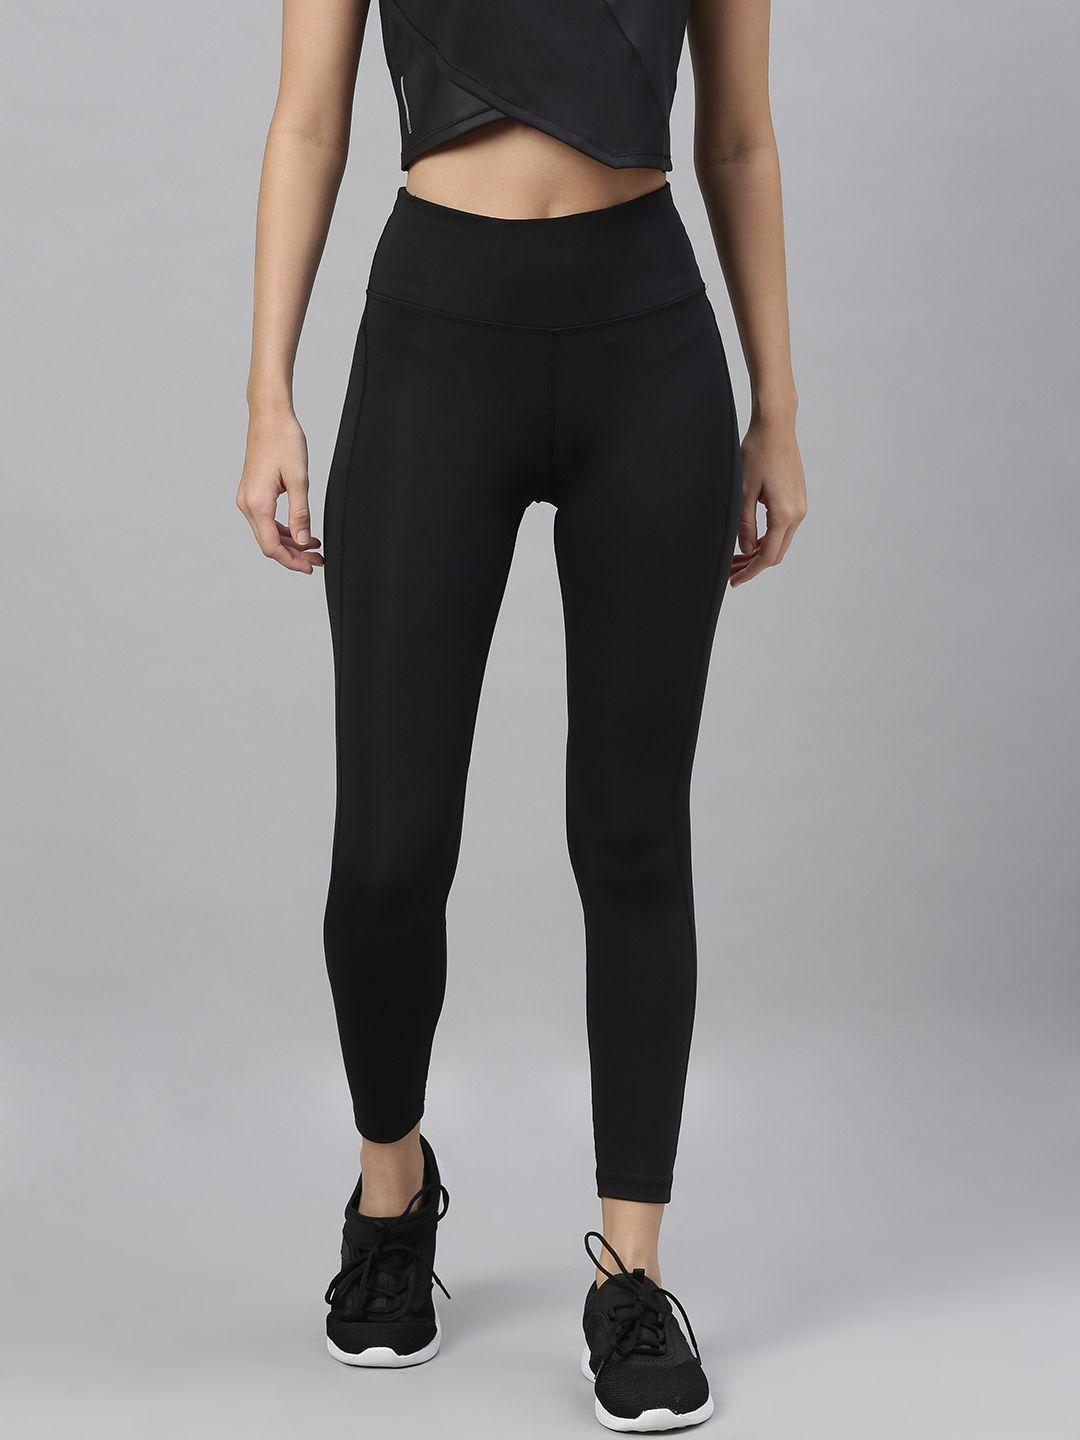 nike women black solid epic fast running tights